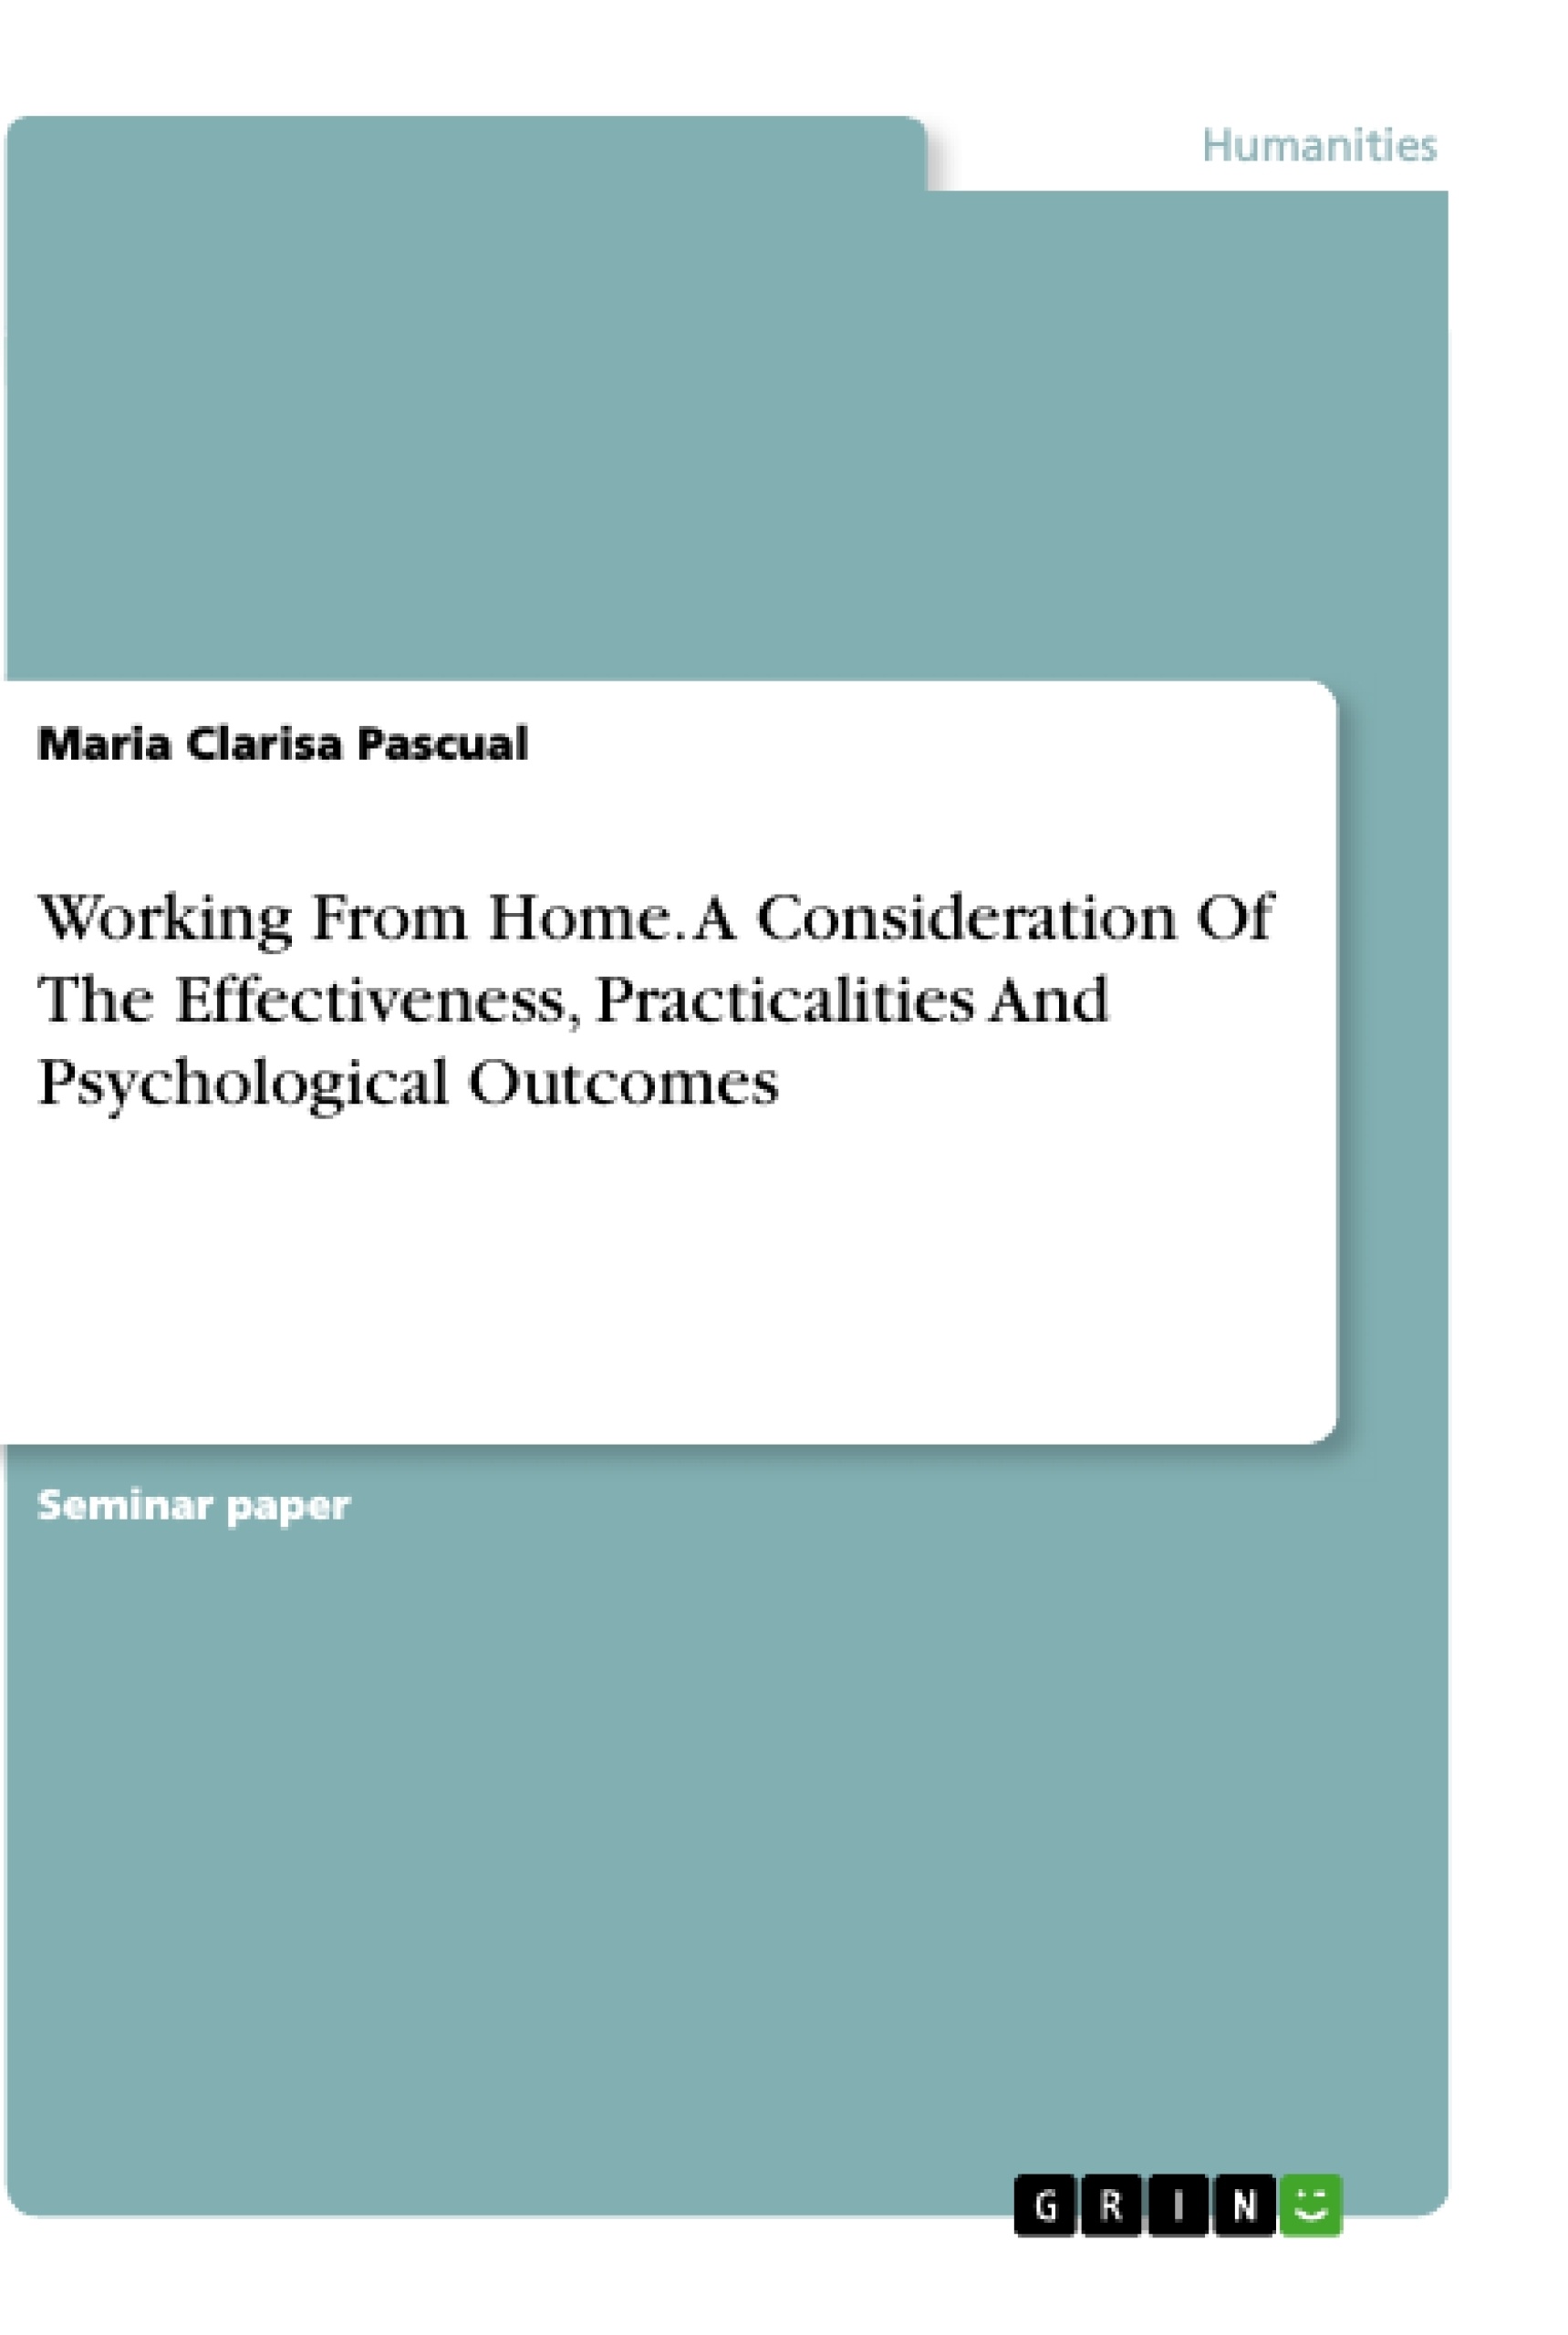 Titel: Working From Home. A Consideration Of The Effectiveness, Practicalities And Psychological Outcomes